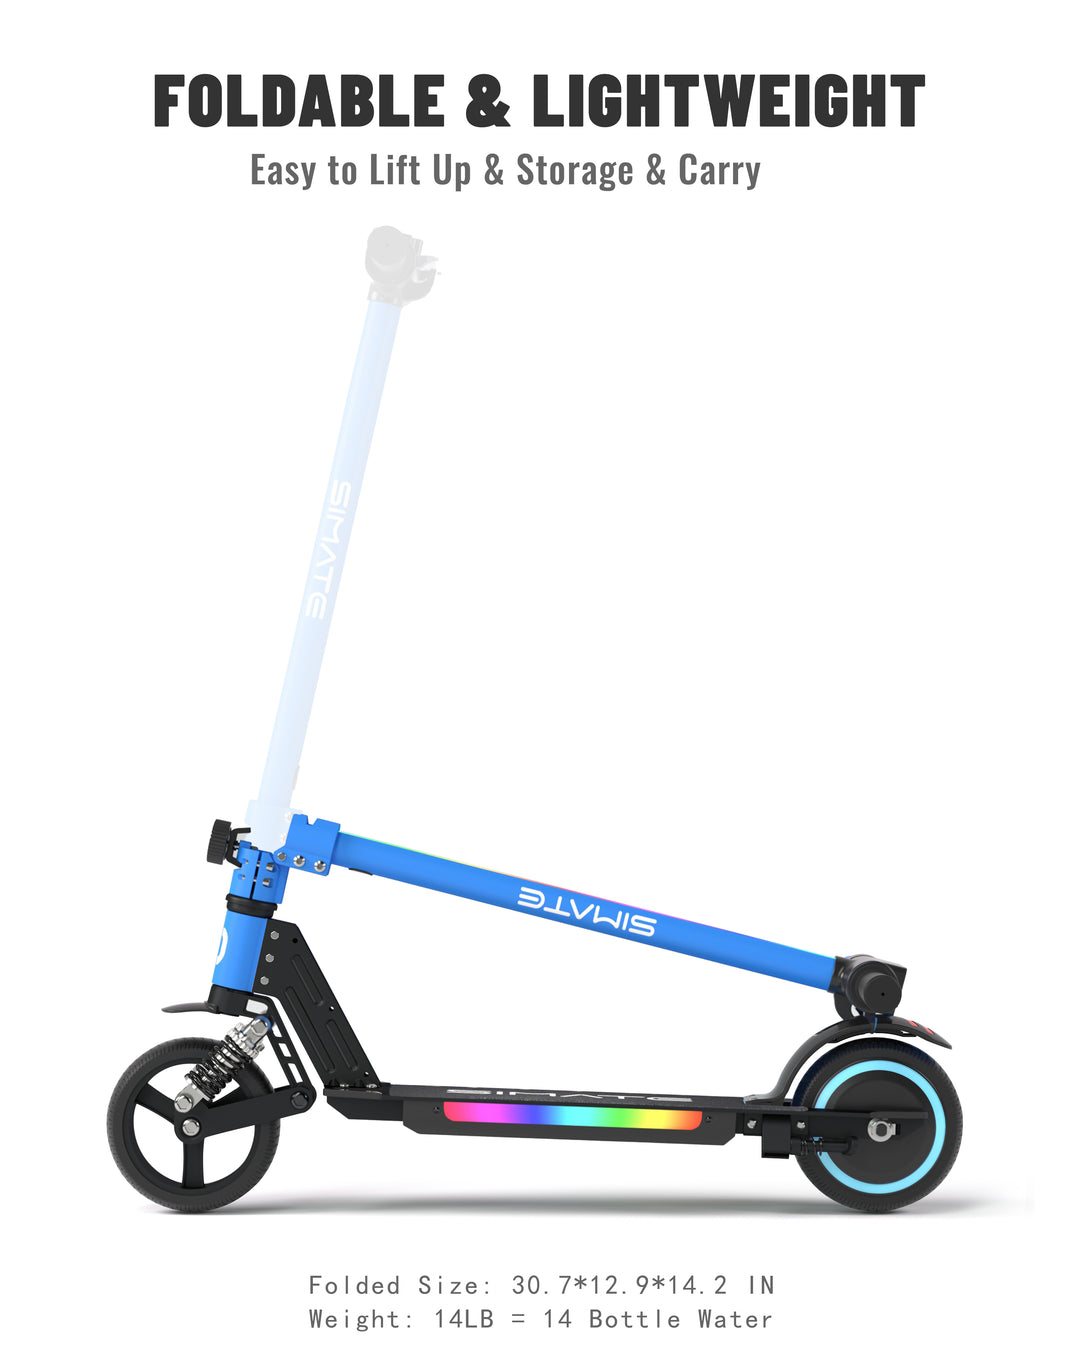 S5 Flash light electric scooter for kids | Blue